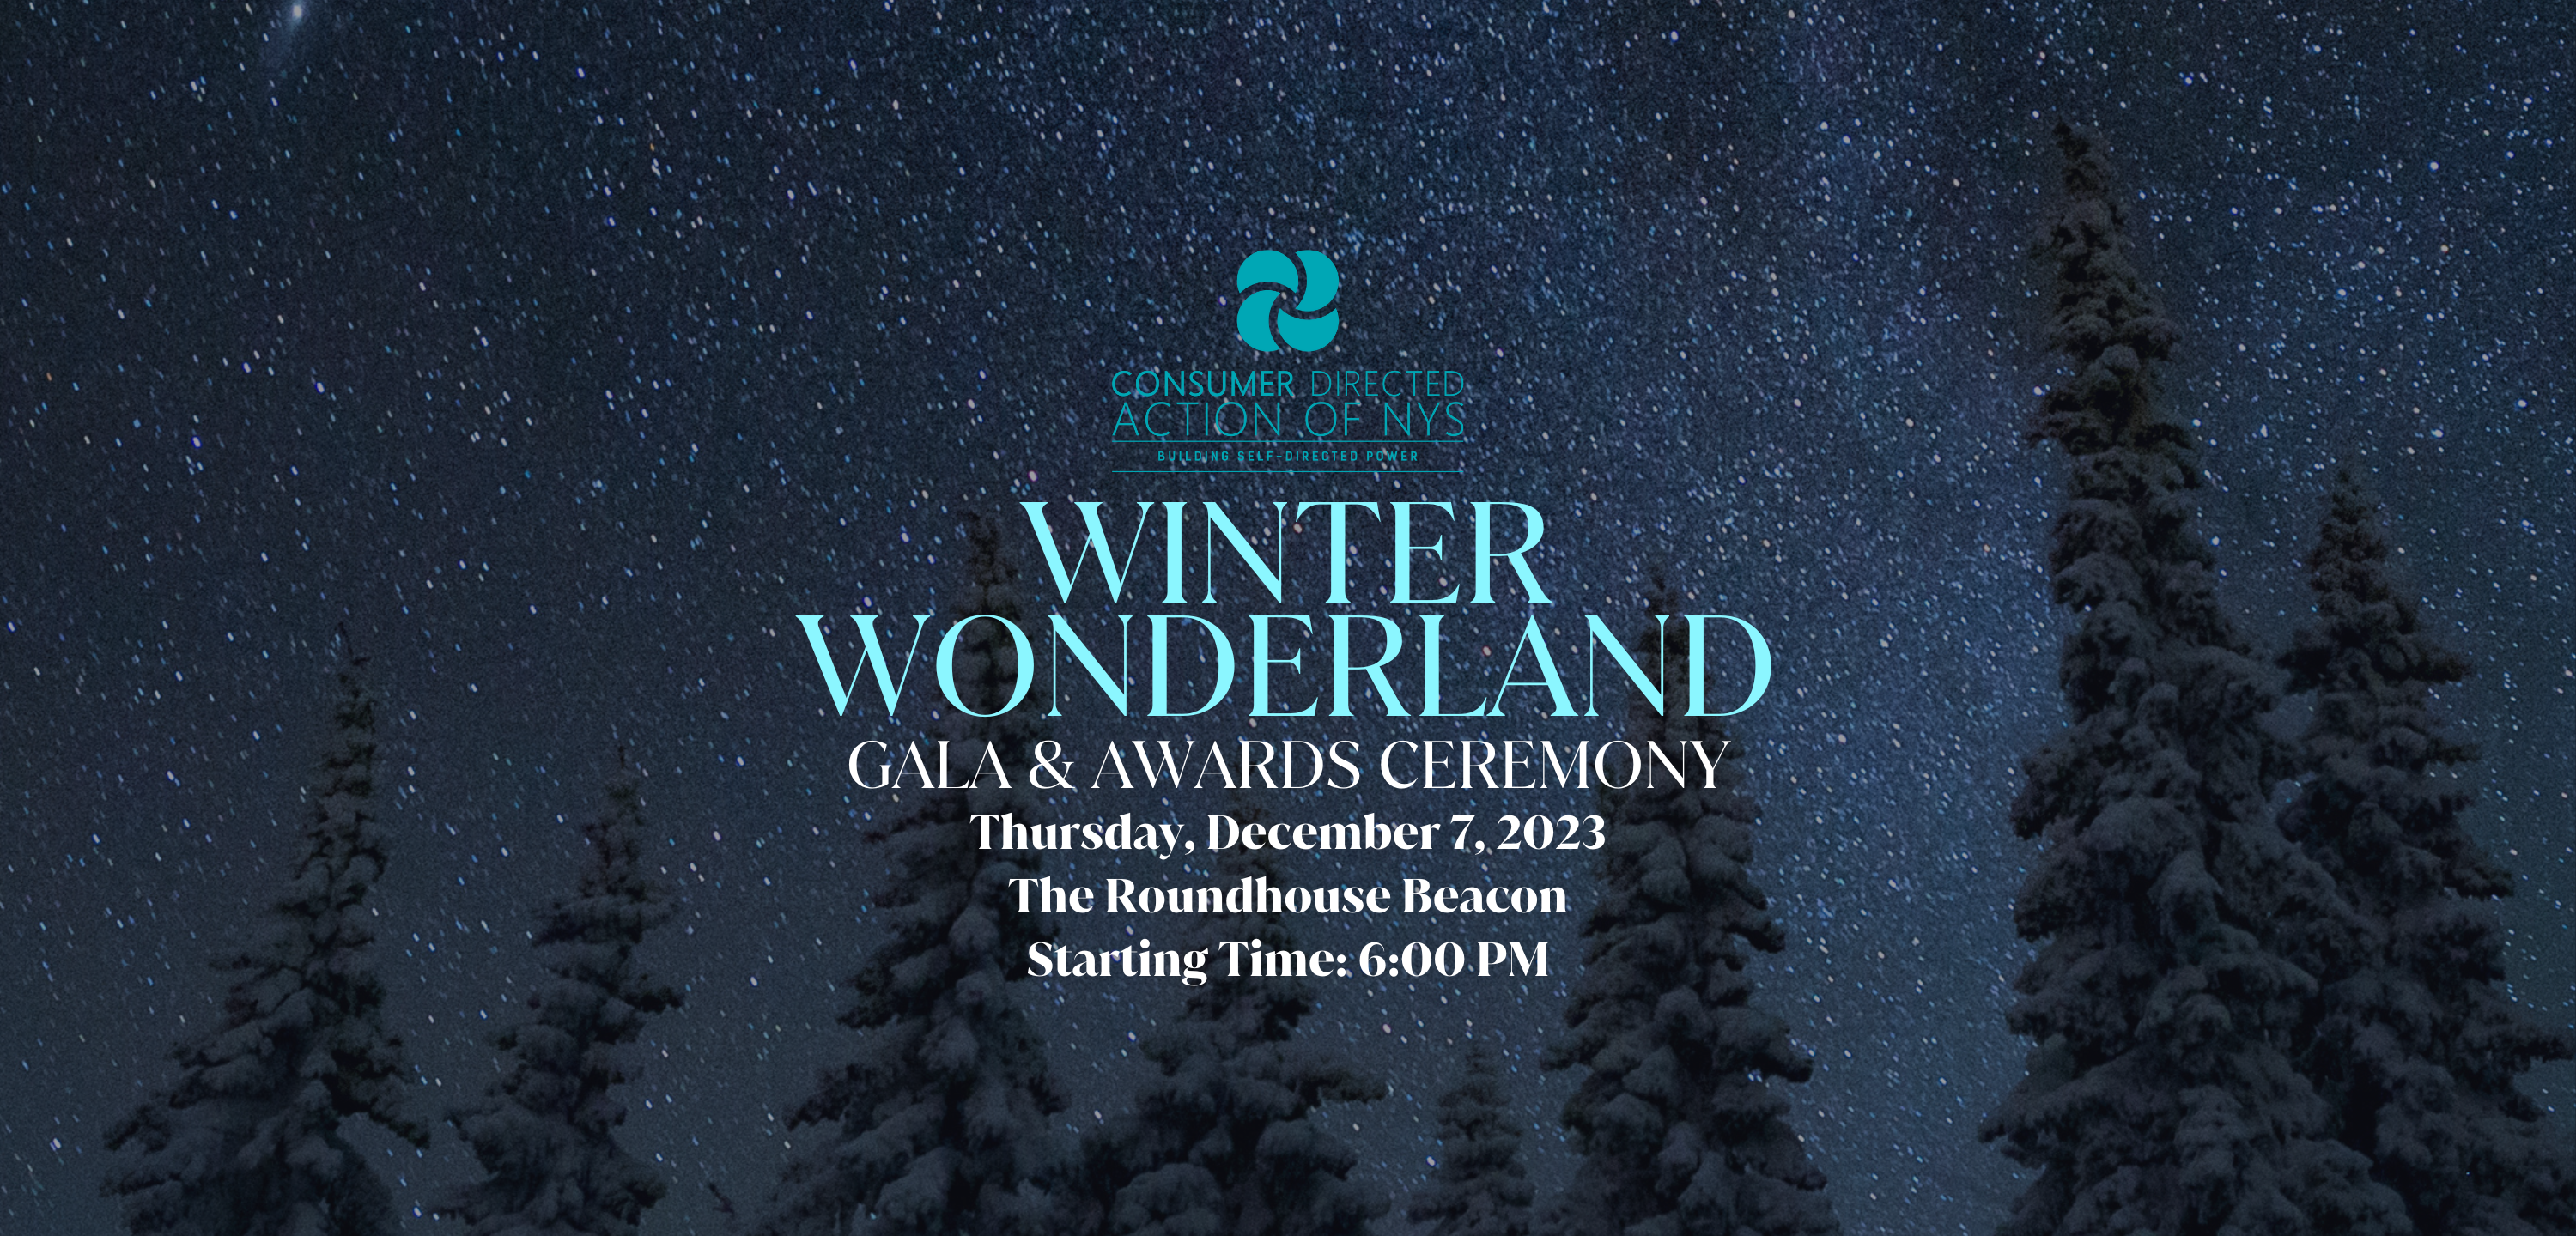 Winter Wonderland Gala 12/7/23 at the Roundhouse in Beacon, NY 6-9 PM